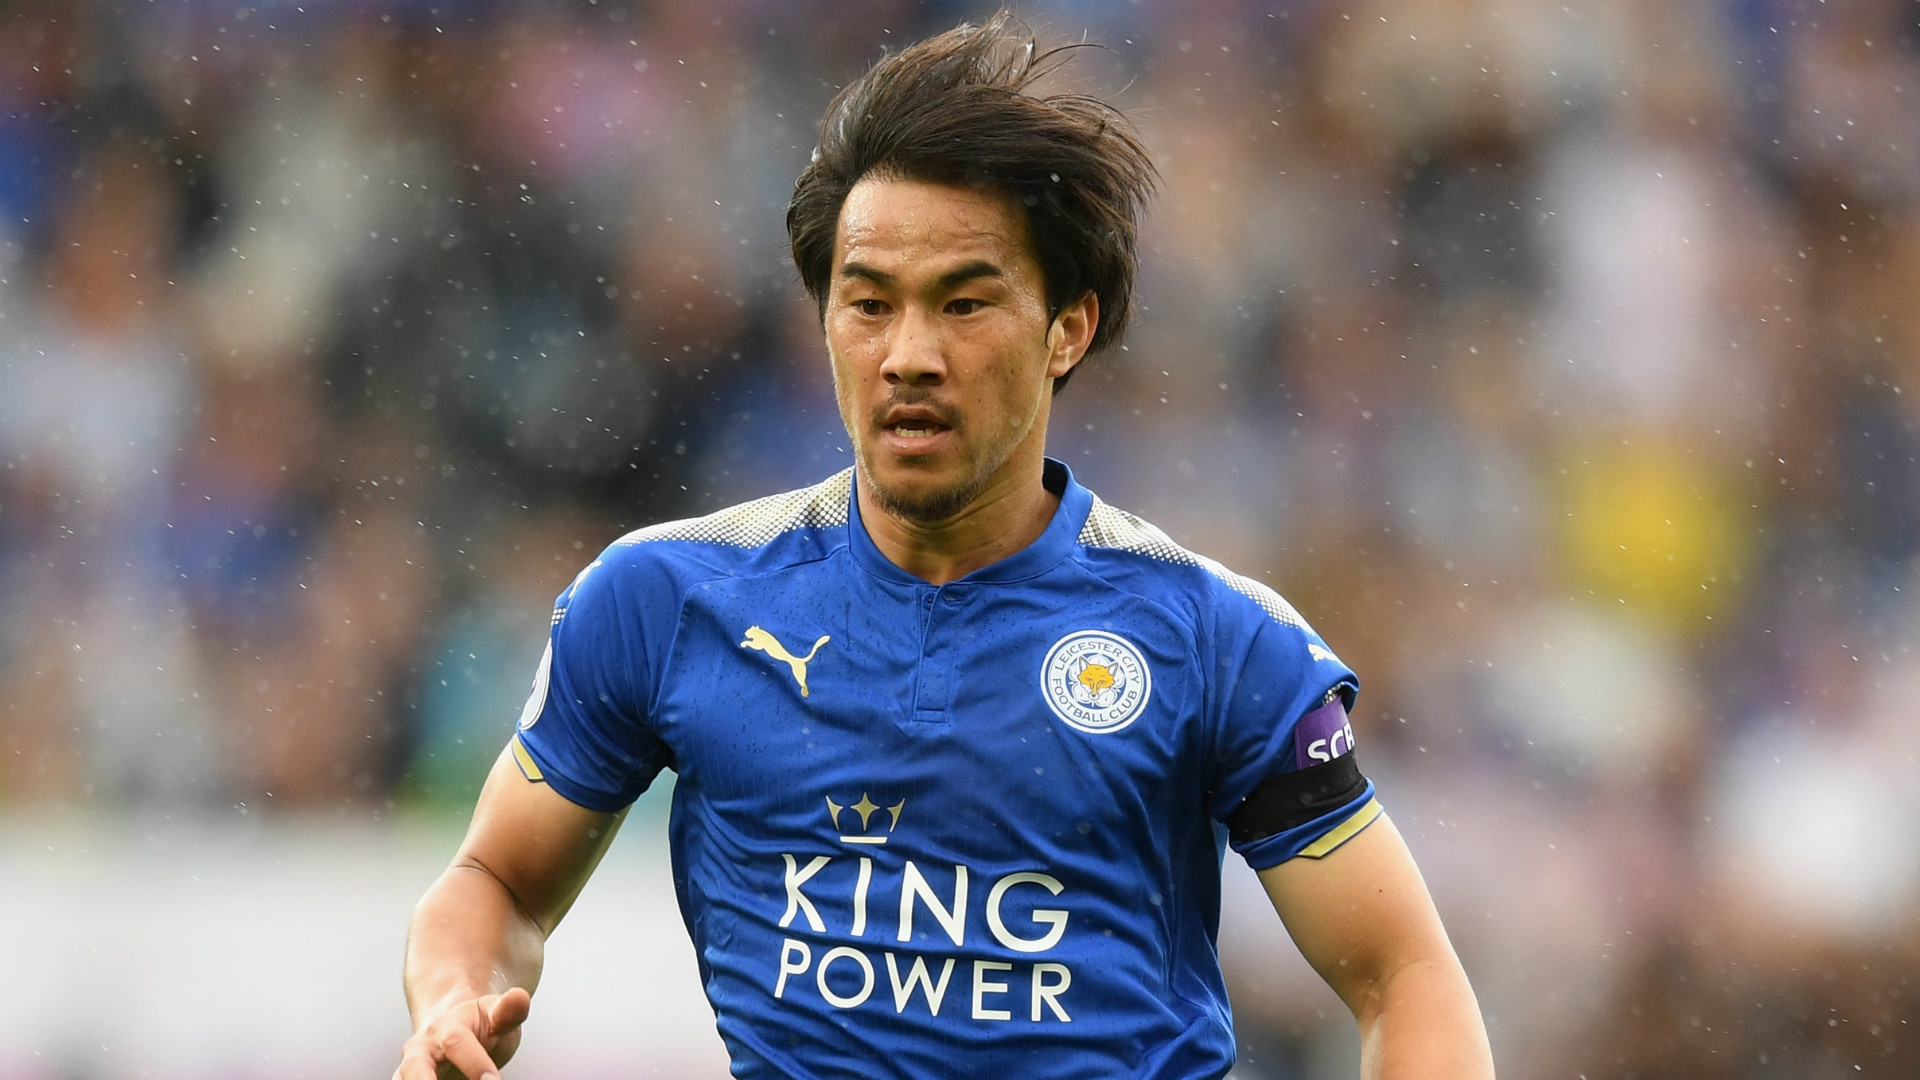 Leicester City should offload out-of-favour star Shinji Okazaki